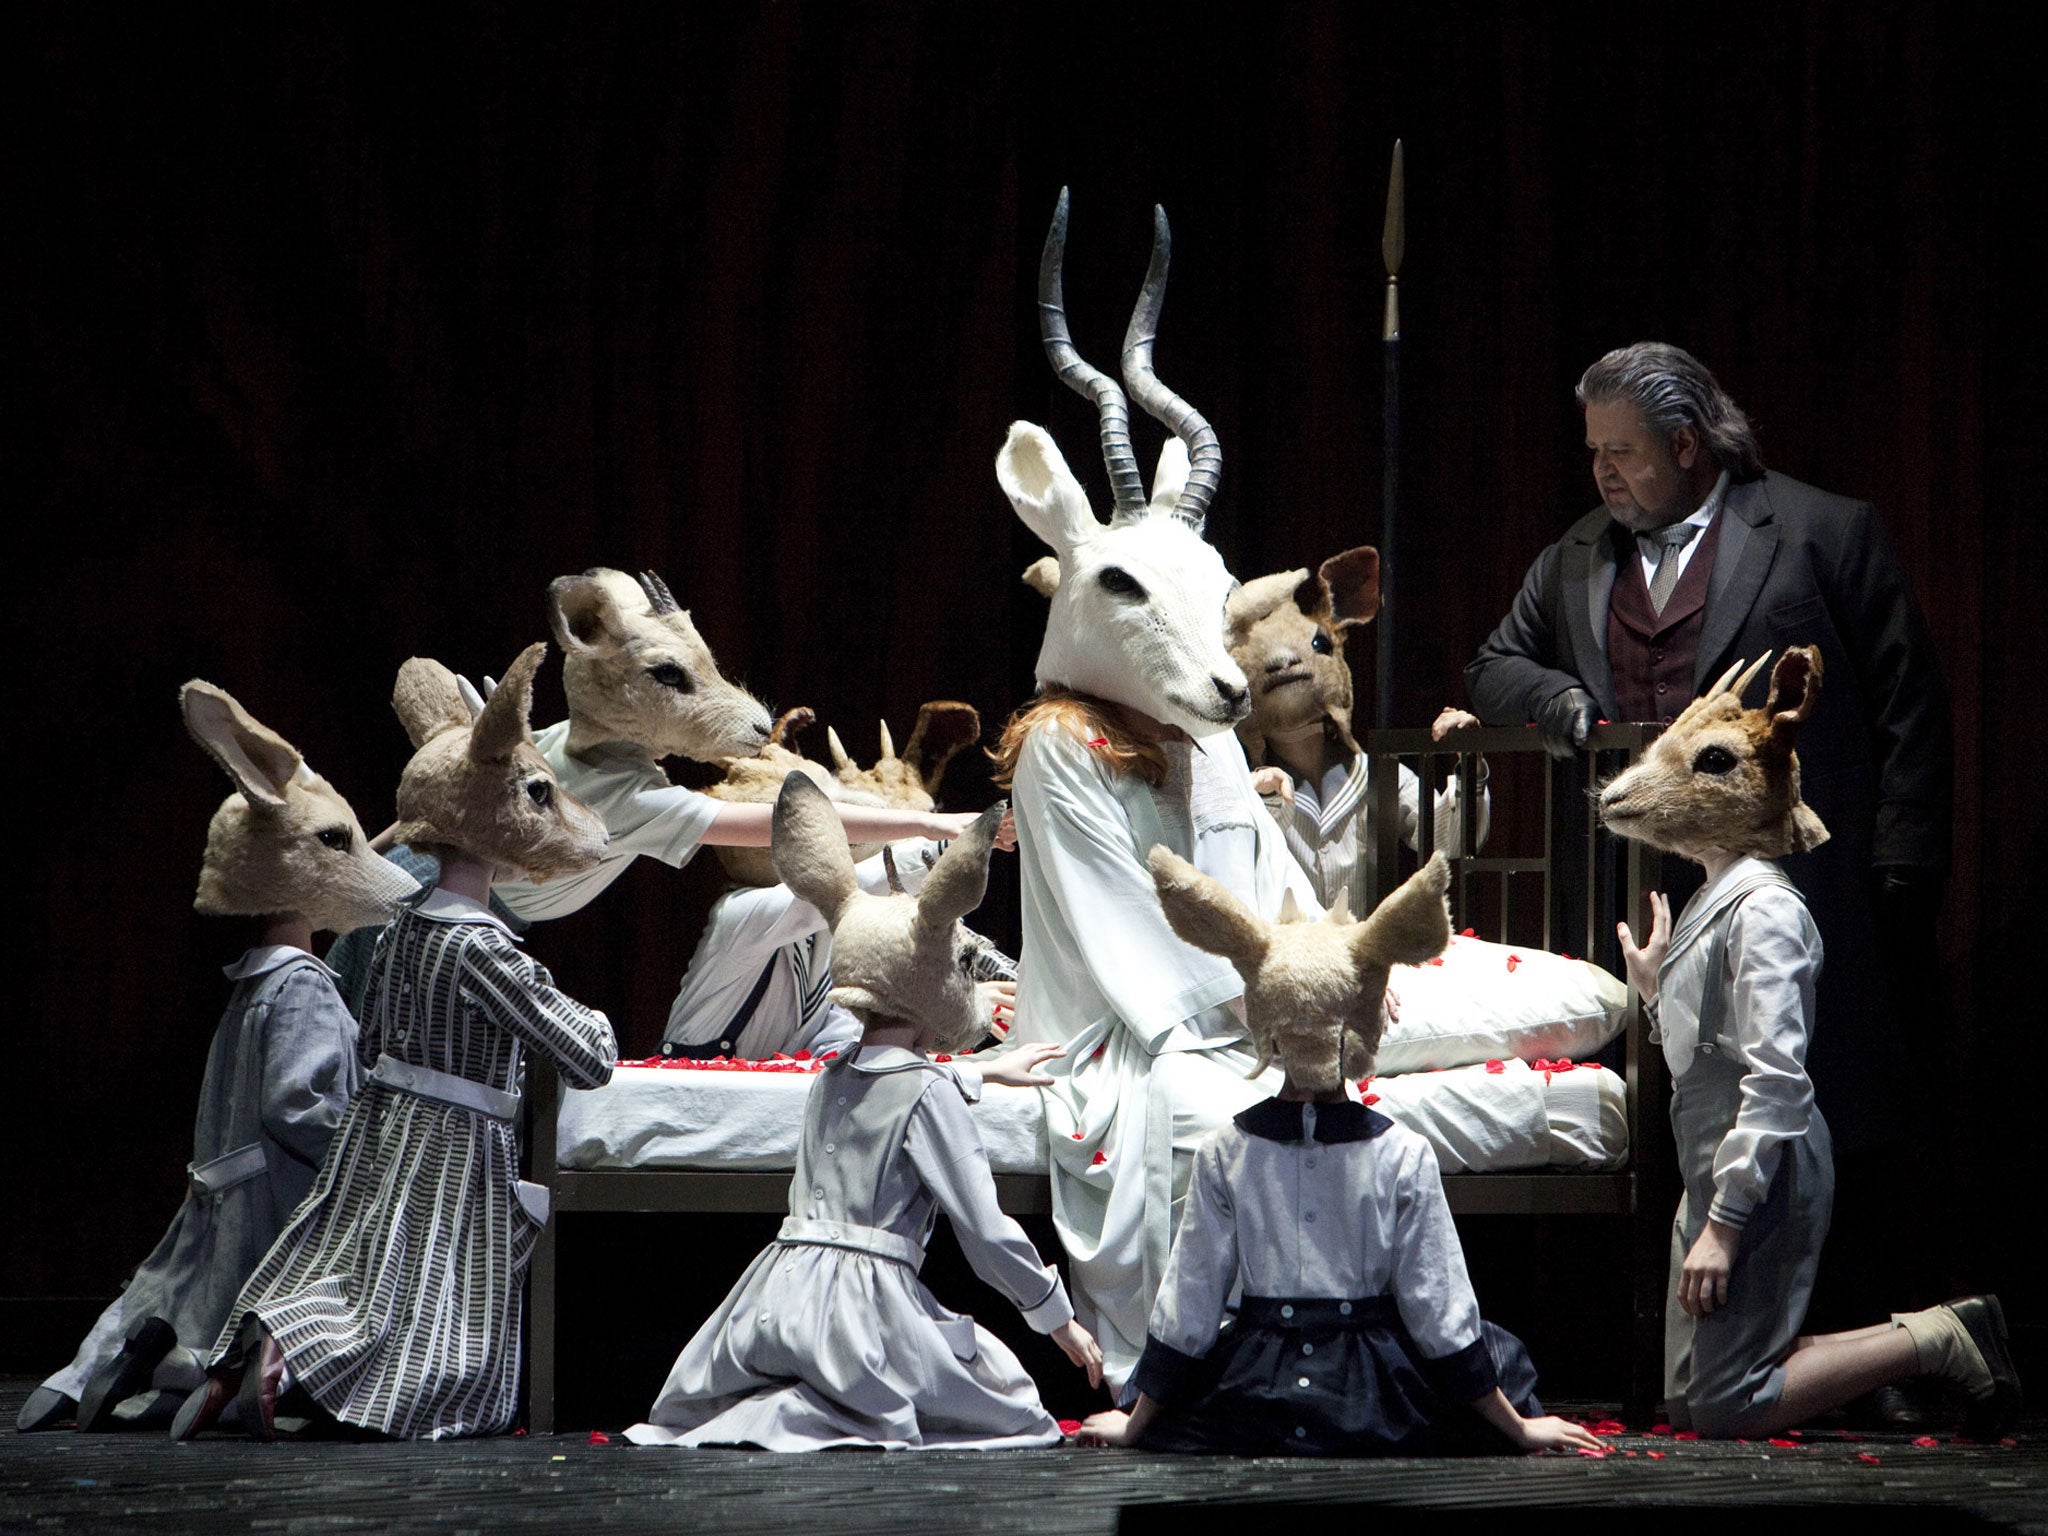 A scene from the Royal Opera House’s upcoming production of Richard Strauss’s Die Frau ohne Schatten